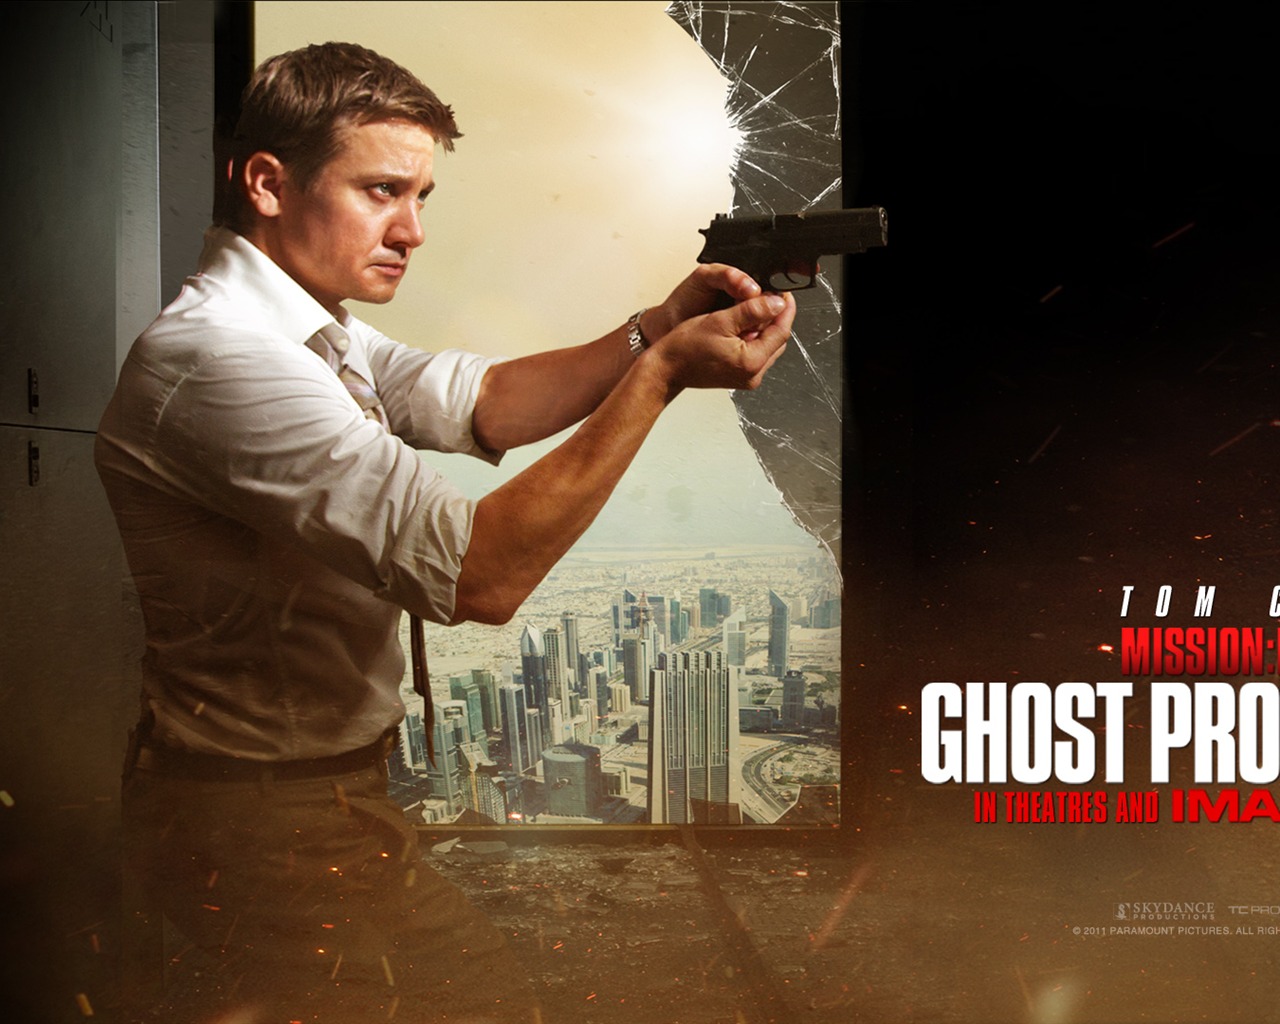 Mission: Impossible - Ghost Protocol 碟中谍4 高清壁纸2 - 1280x1024